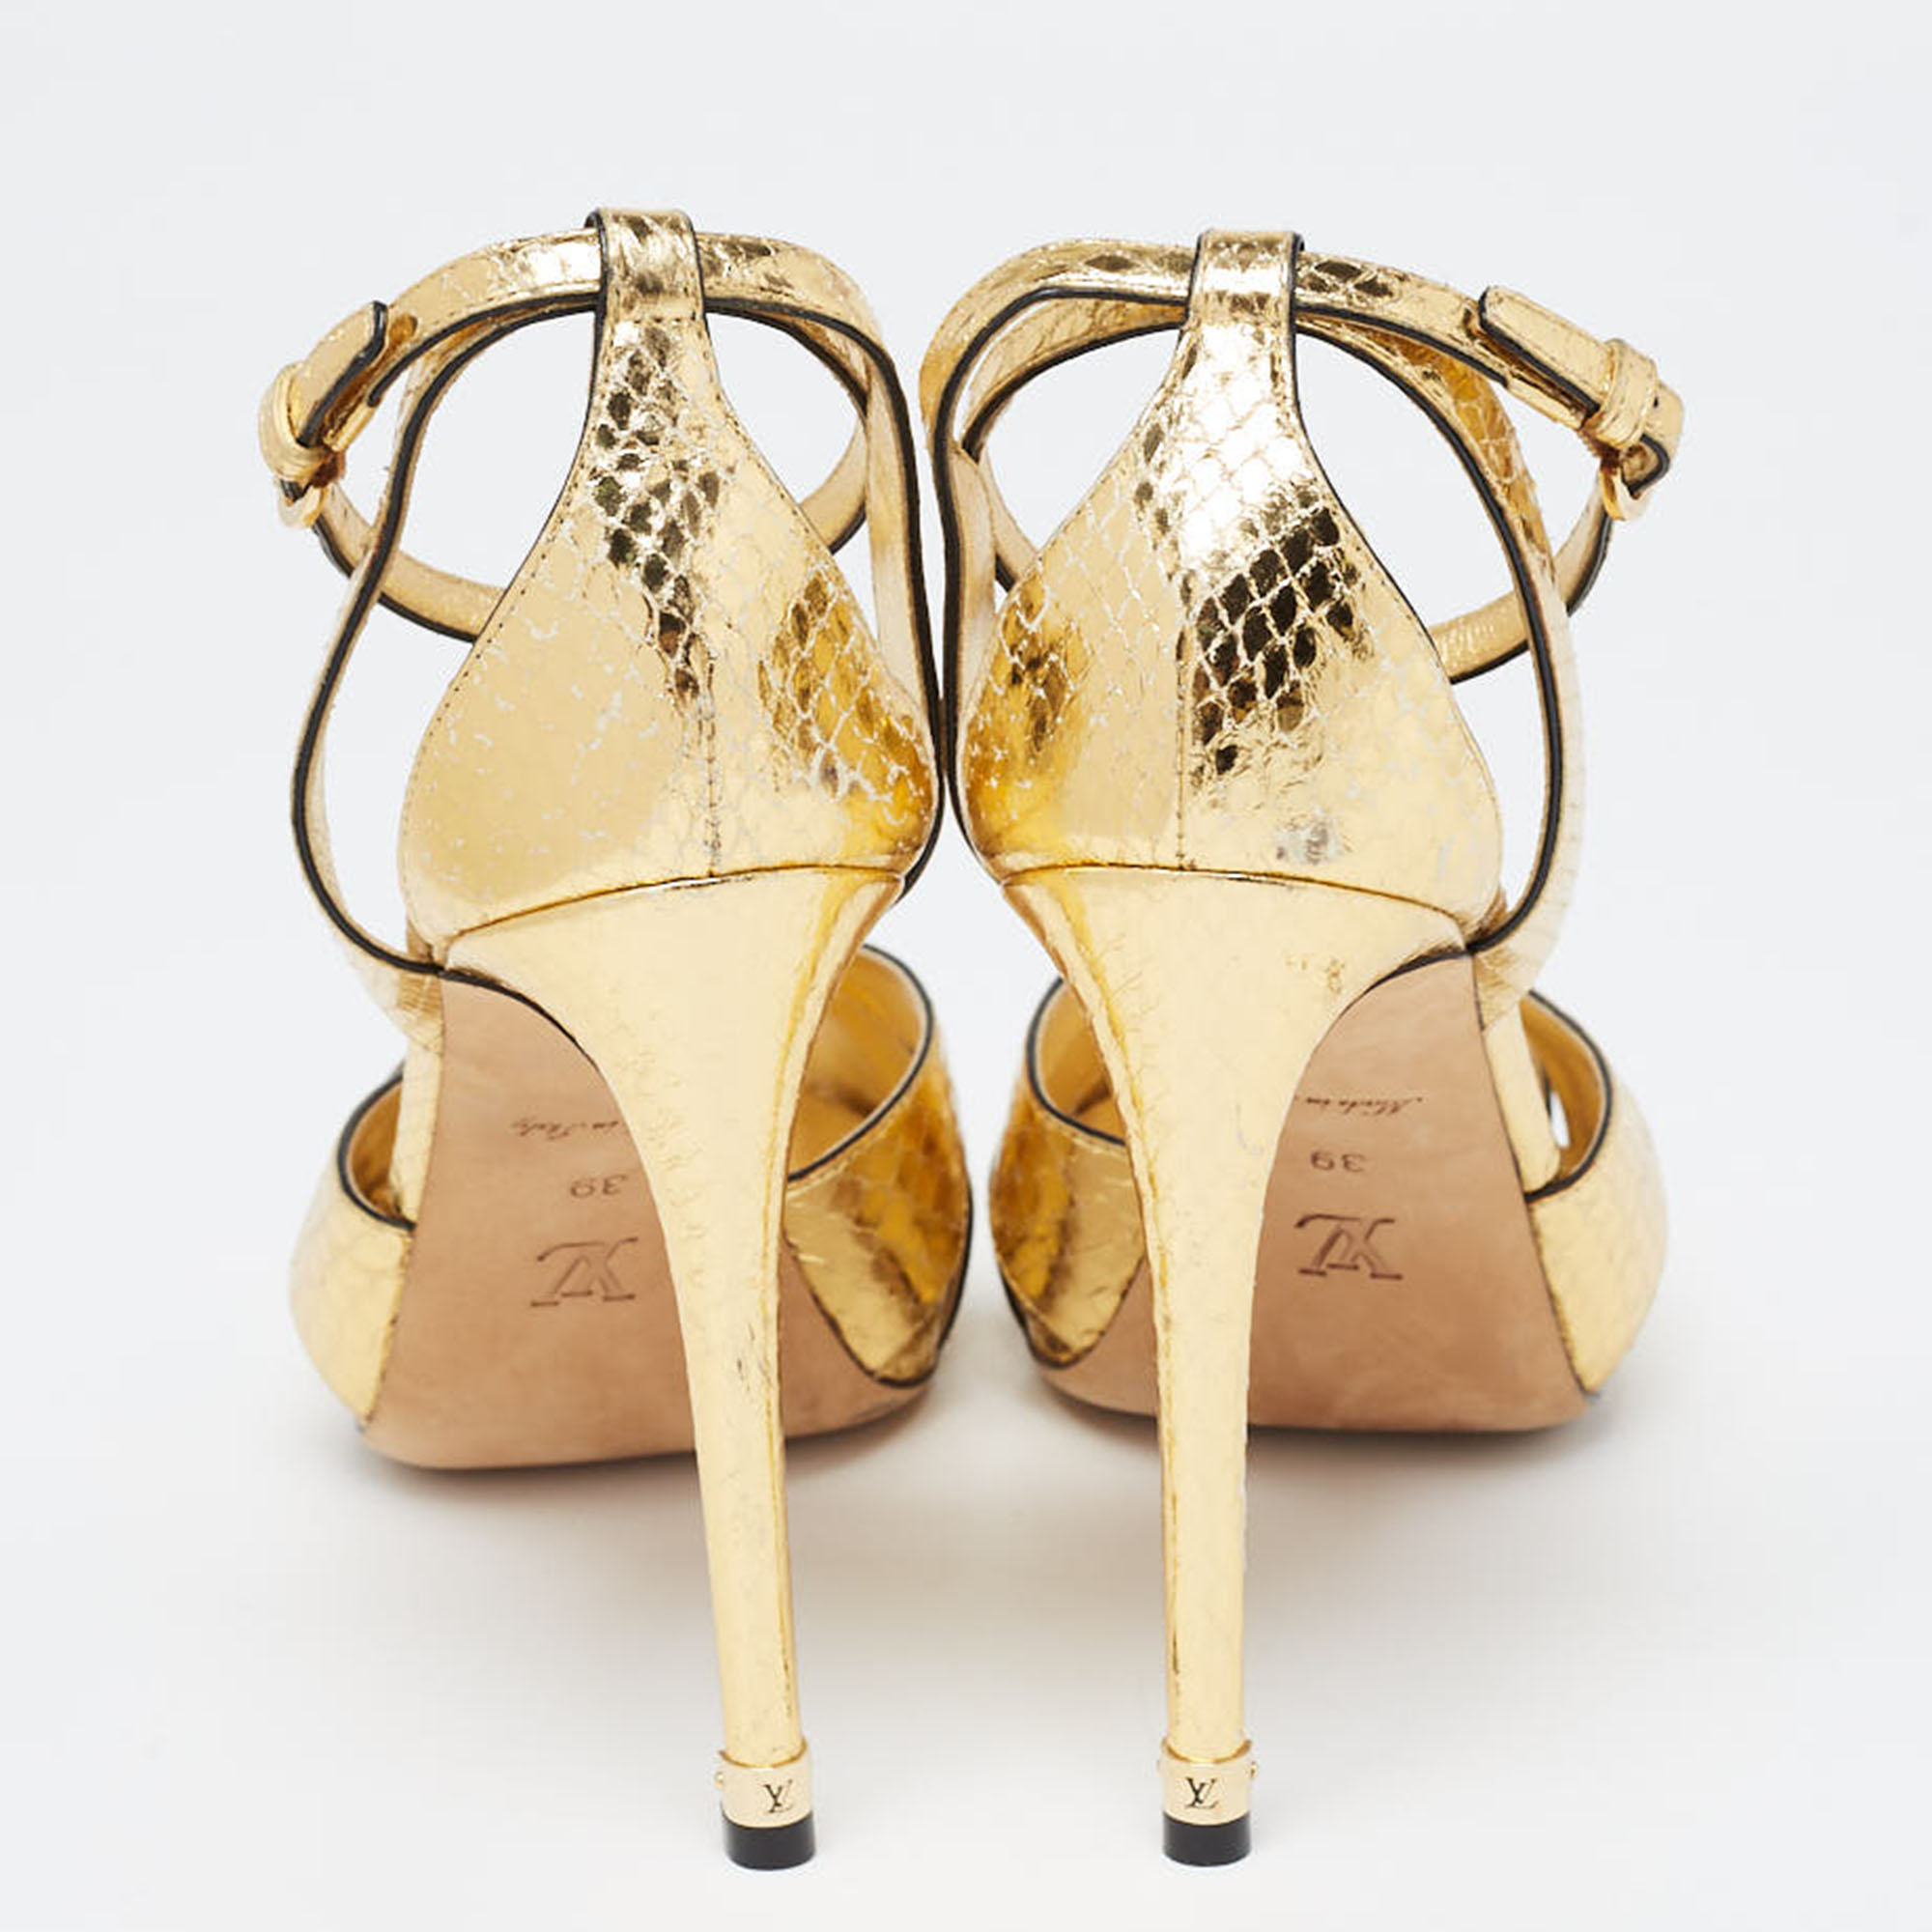 Louis Vuitton Metallic Gold Python Embossed Leather Peep Toe Strappy Sandals Size 39